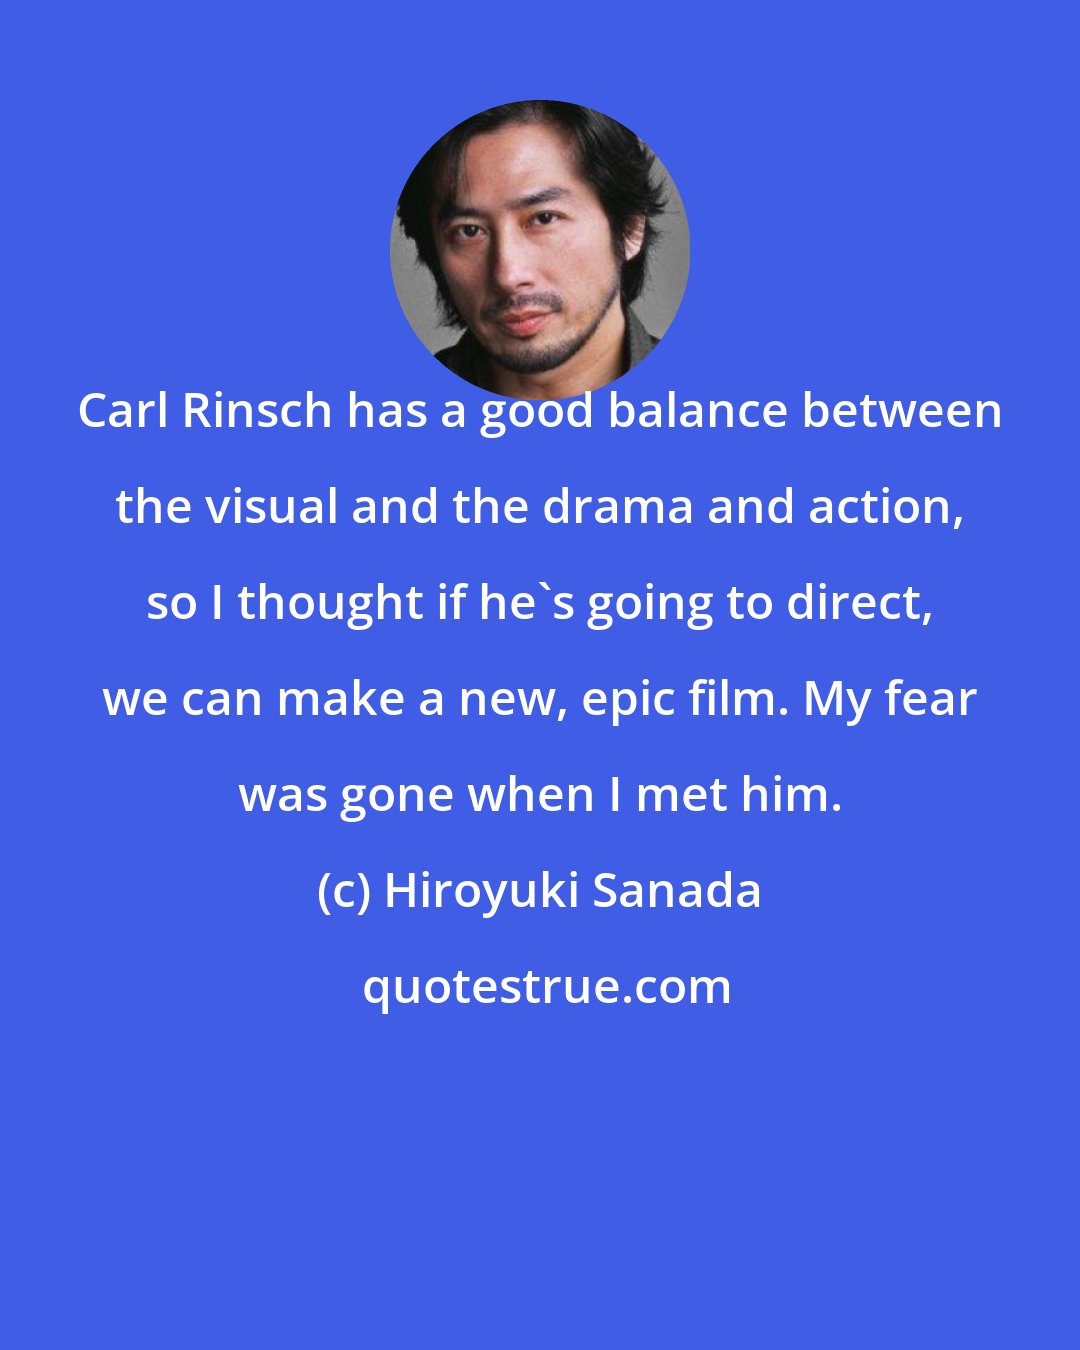 Hiroyuki Sanada: Carl Rinsch has a good balance between the visual and the drama and action, so I thought if he's going to direct, we can make a new, epic film. My fear was gone when I met him.